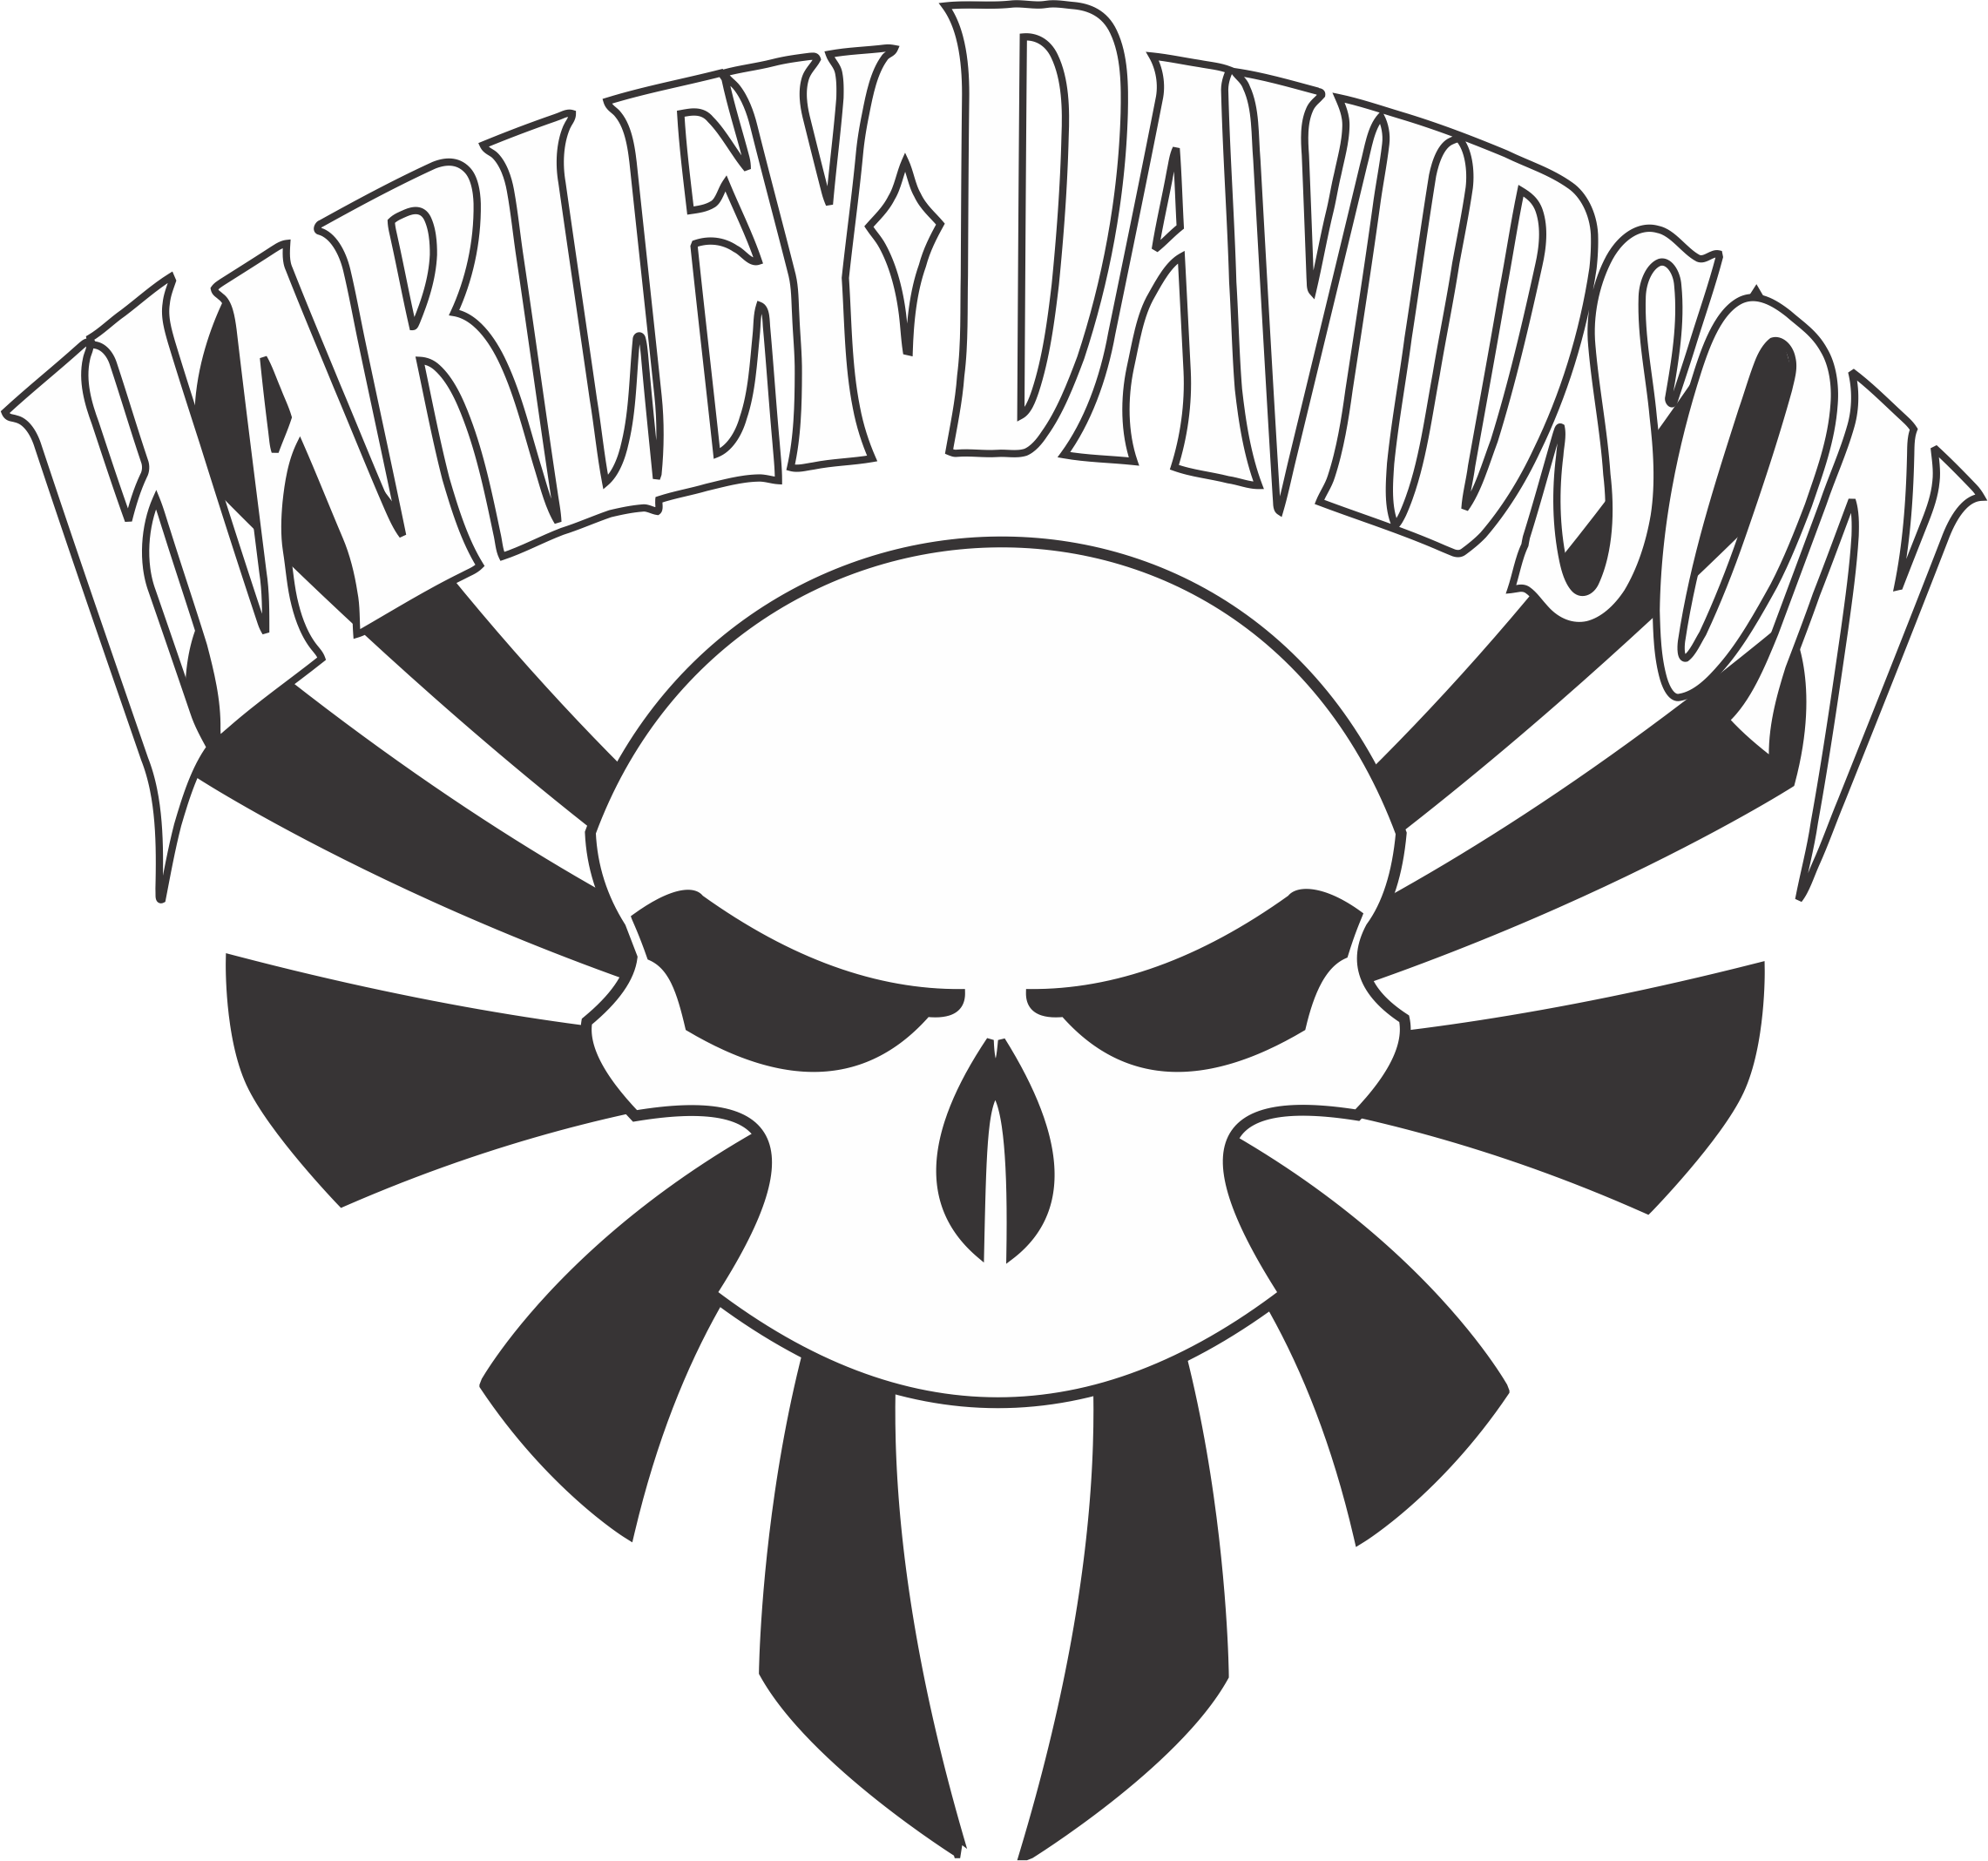 Harley Davidson Drawing Outline at Free for personal